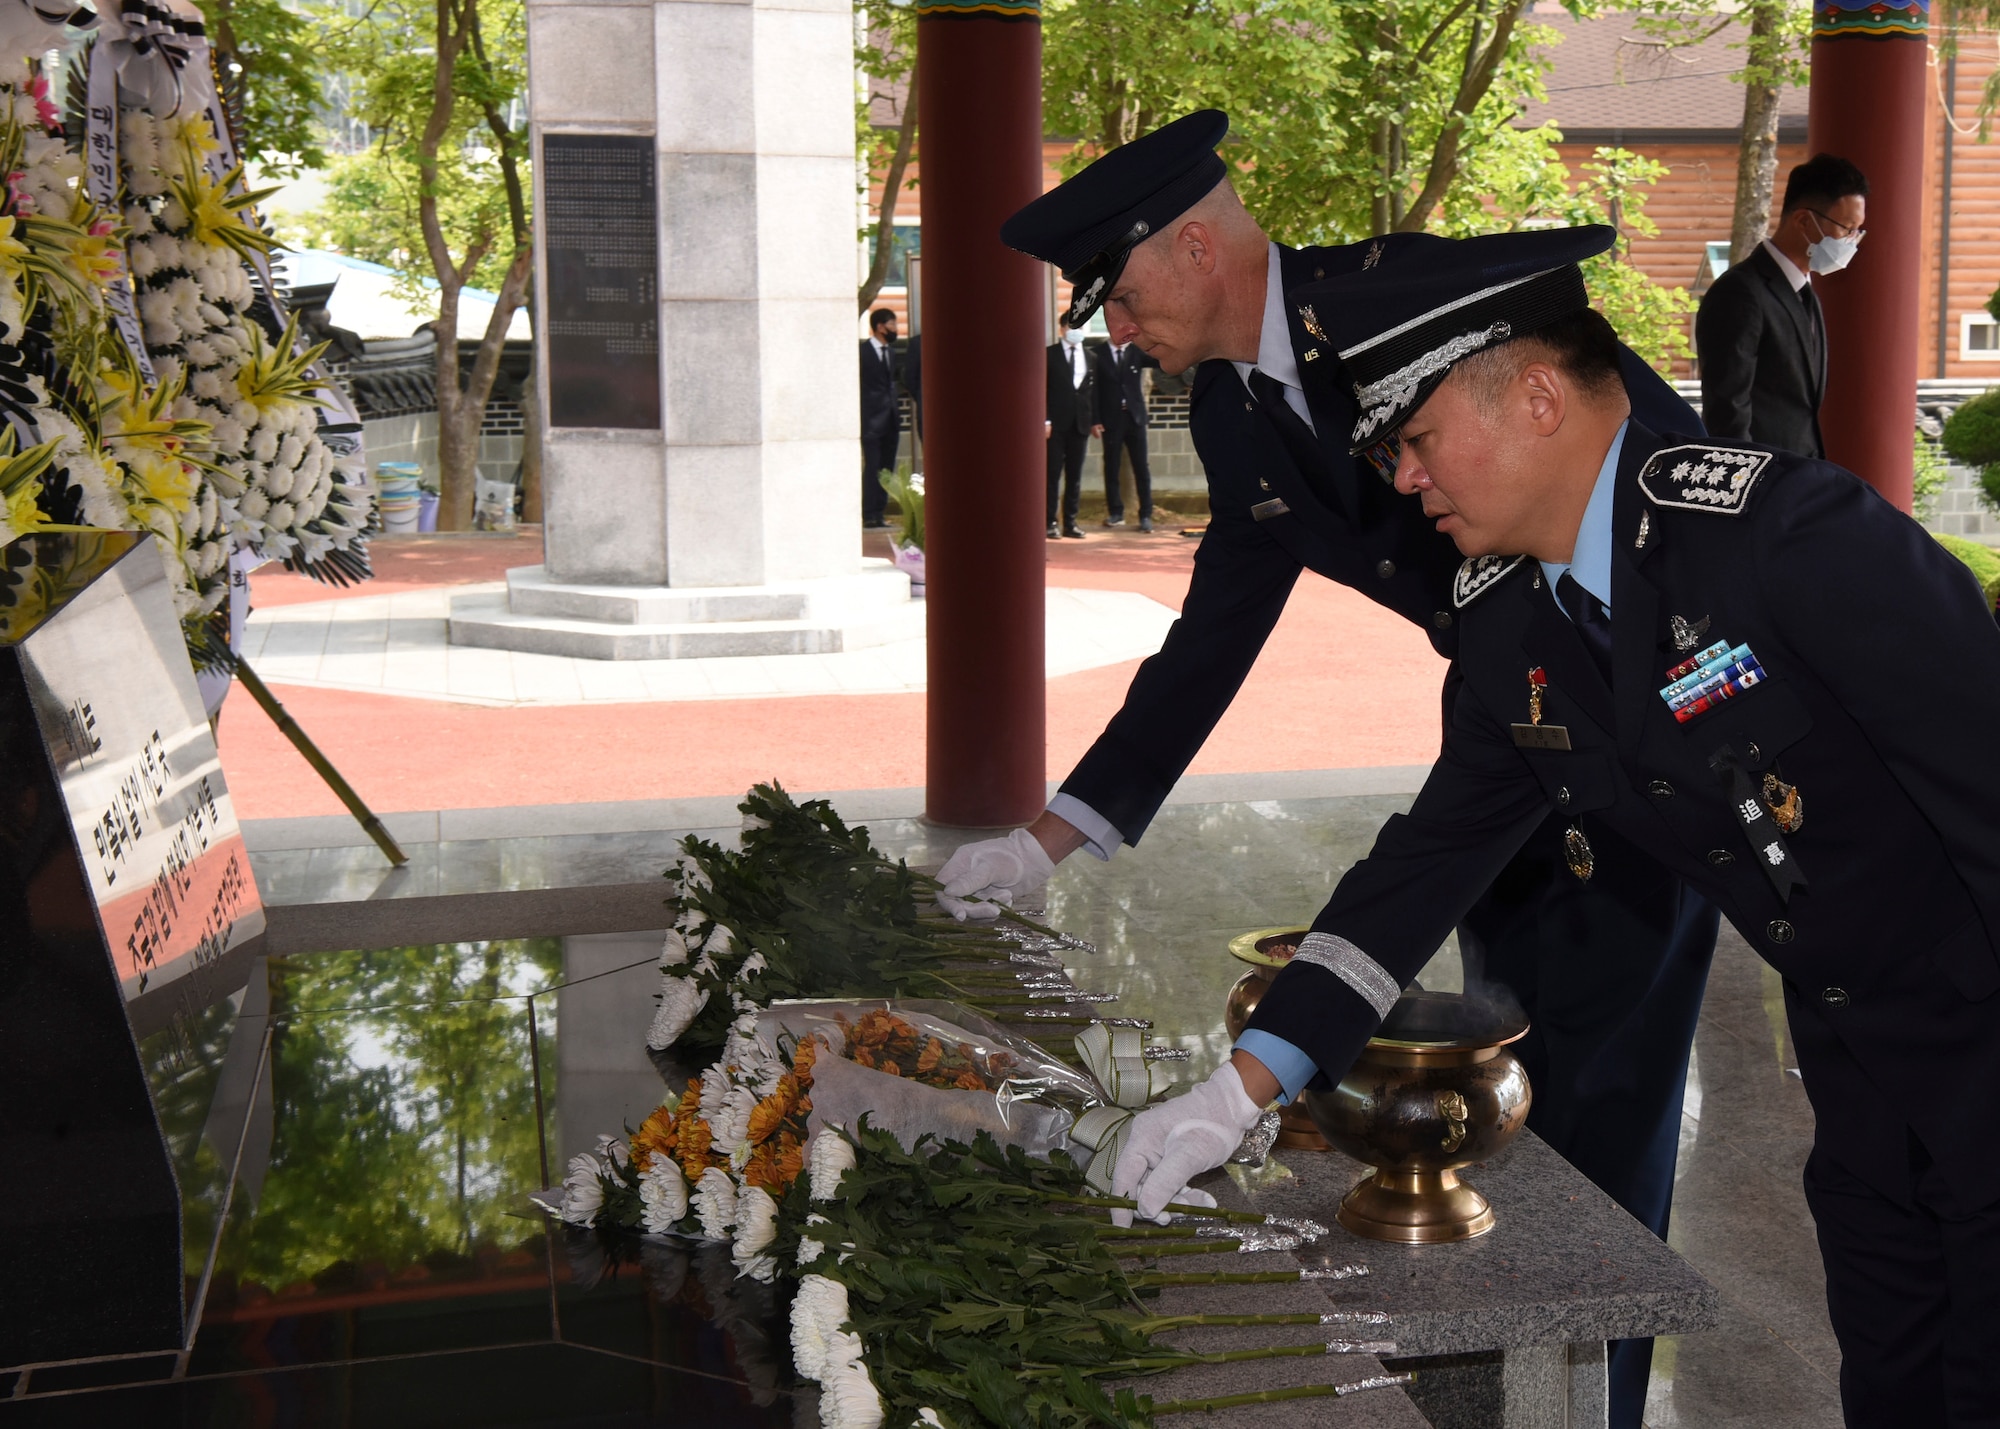 U.S. Air Force Col. Chris Hammond, 8th Fighter Wing commander, lays a white carnation to honor the fallen during the Korean Memorial Day ceremony at Gunsan City, Republic of Korea, June 6, 2020. The Korean citizens who died while serving in the military and those who lost their lives during the independence movement were honored with white carnations during the ceremony while flags and flowers were displayed at each headstone. (U.S. Air Force photo by Staff Sgt. Anthony Hetlage)